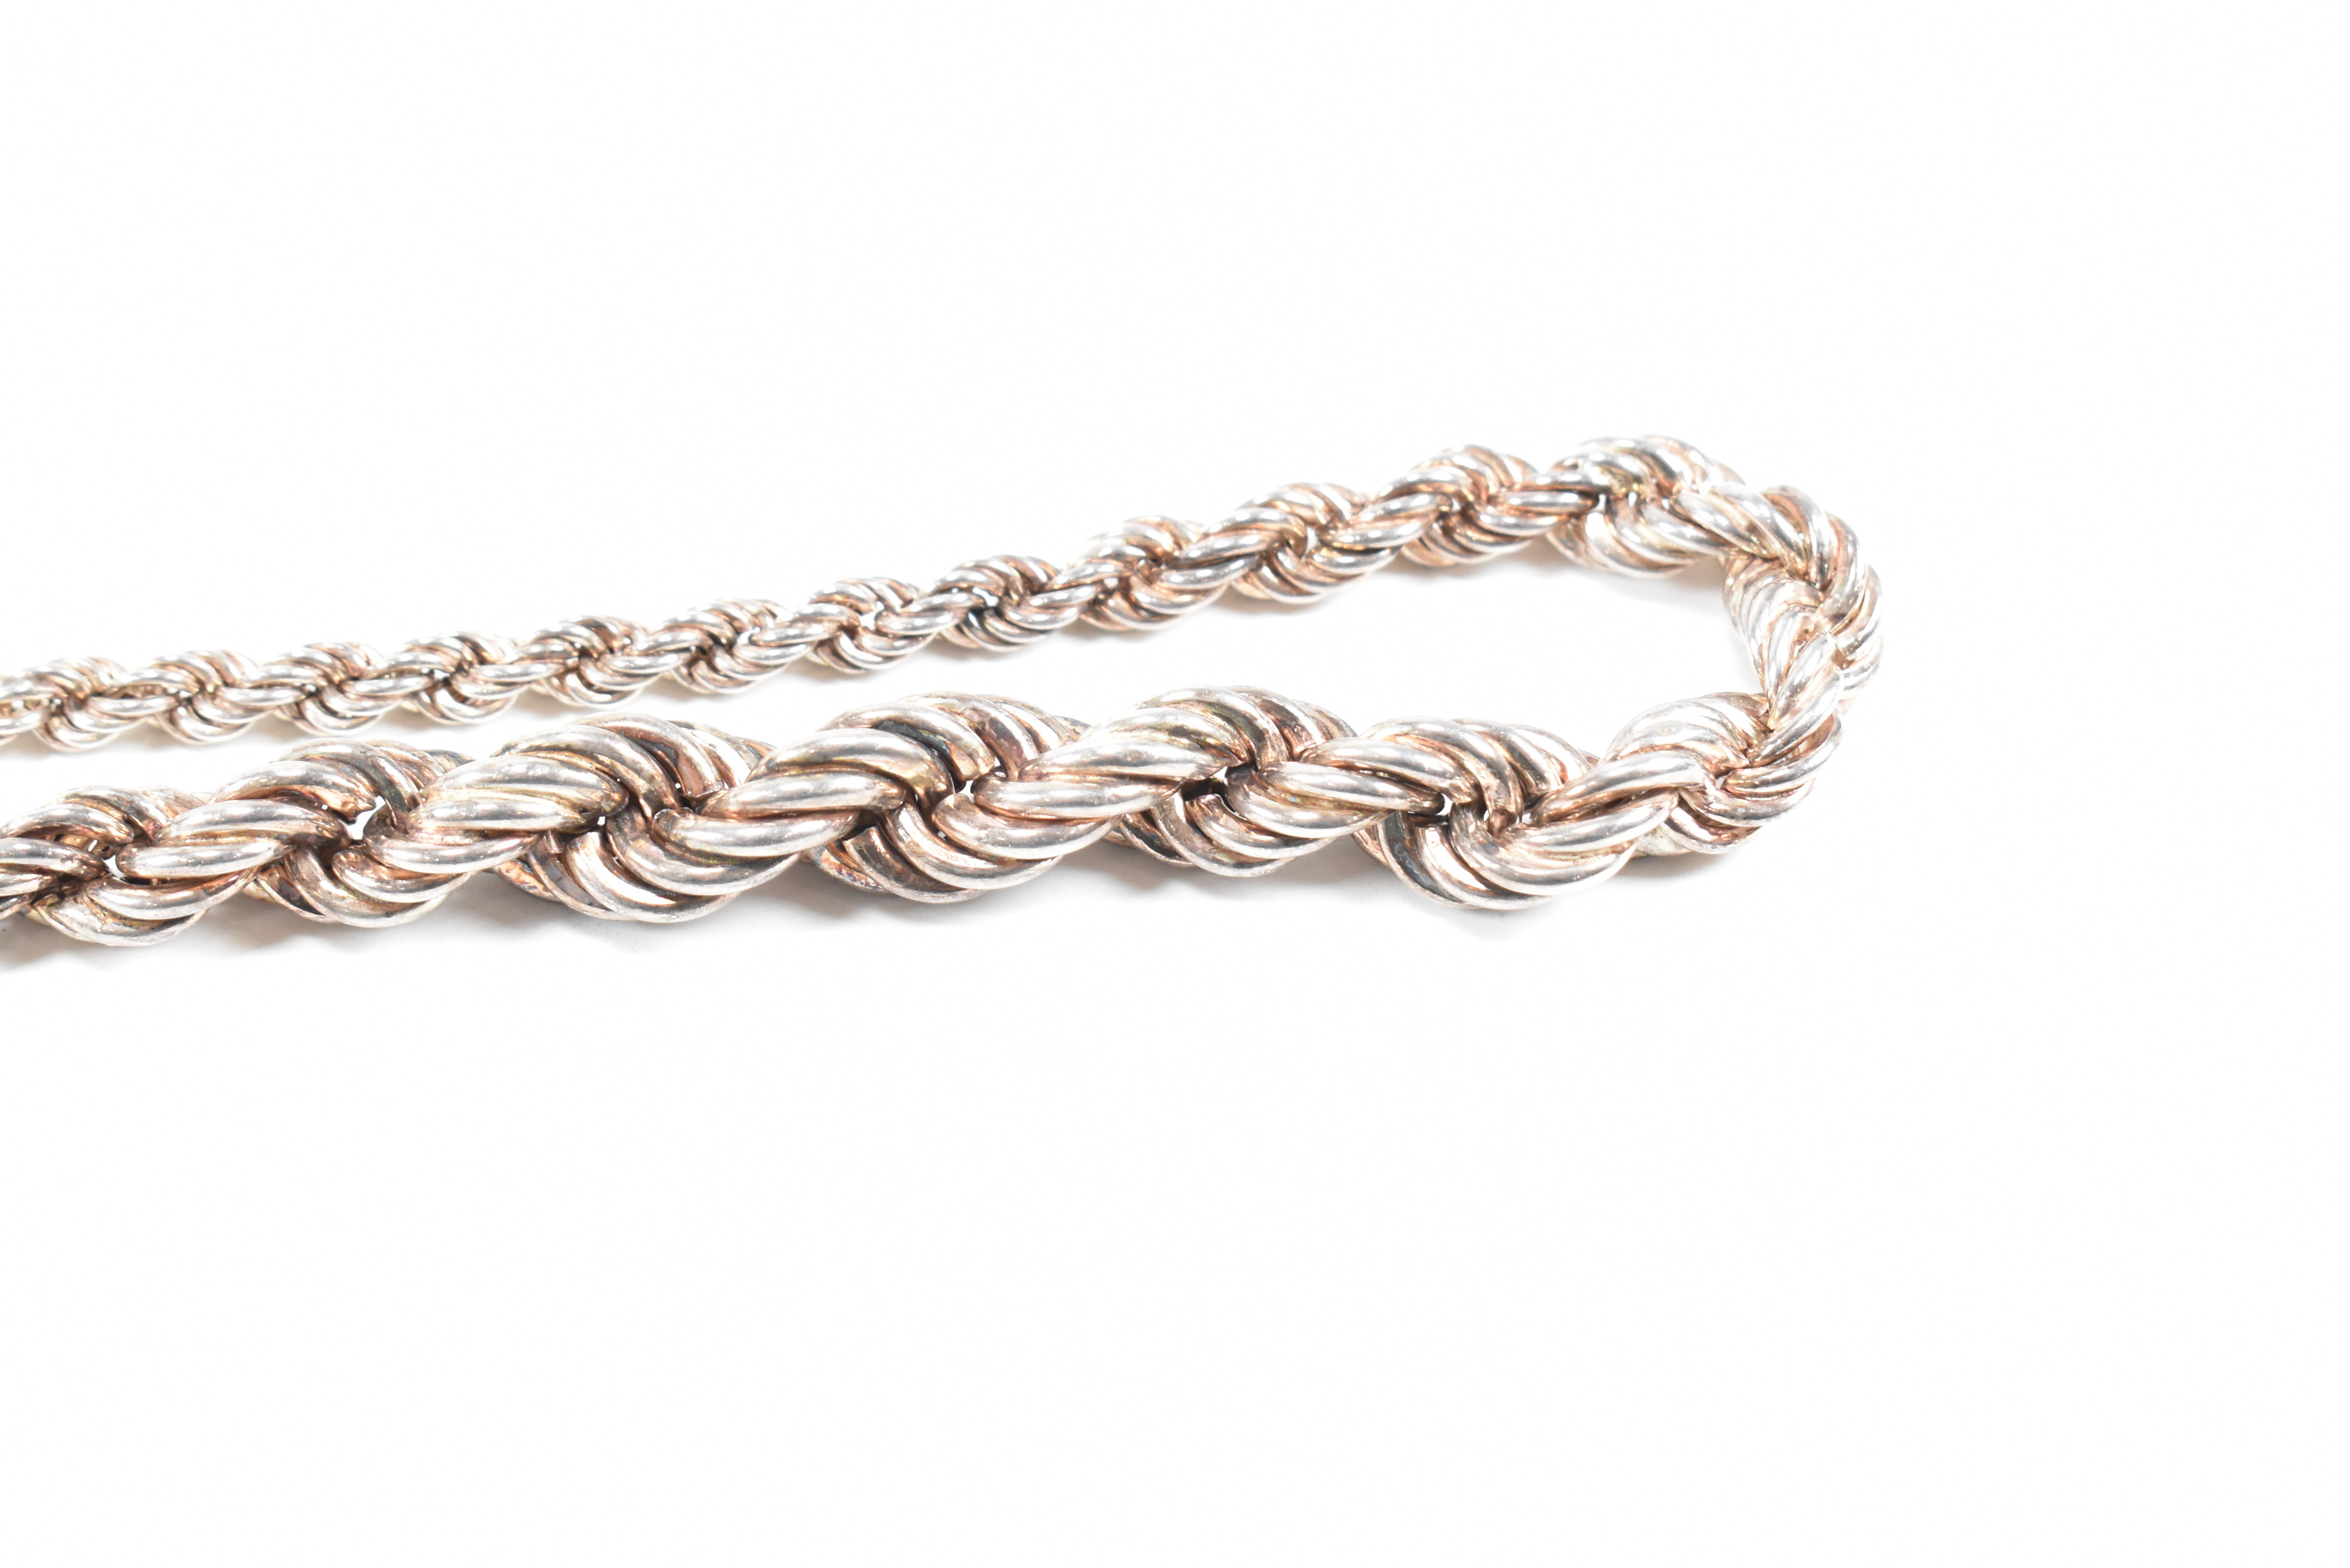 HALLMARKED 925 SILVER ROPE TWIST CHAIN NECKLACE - Image 5 of 6